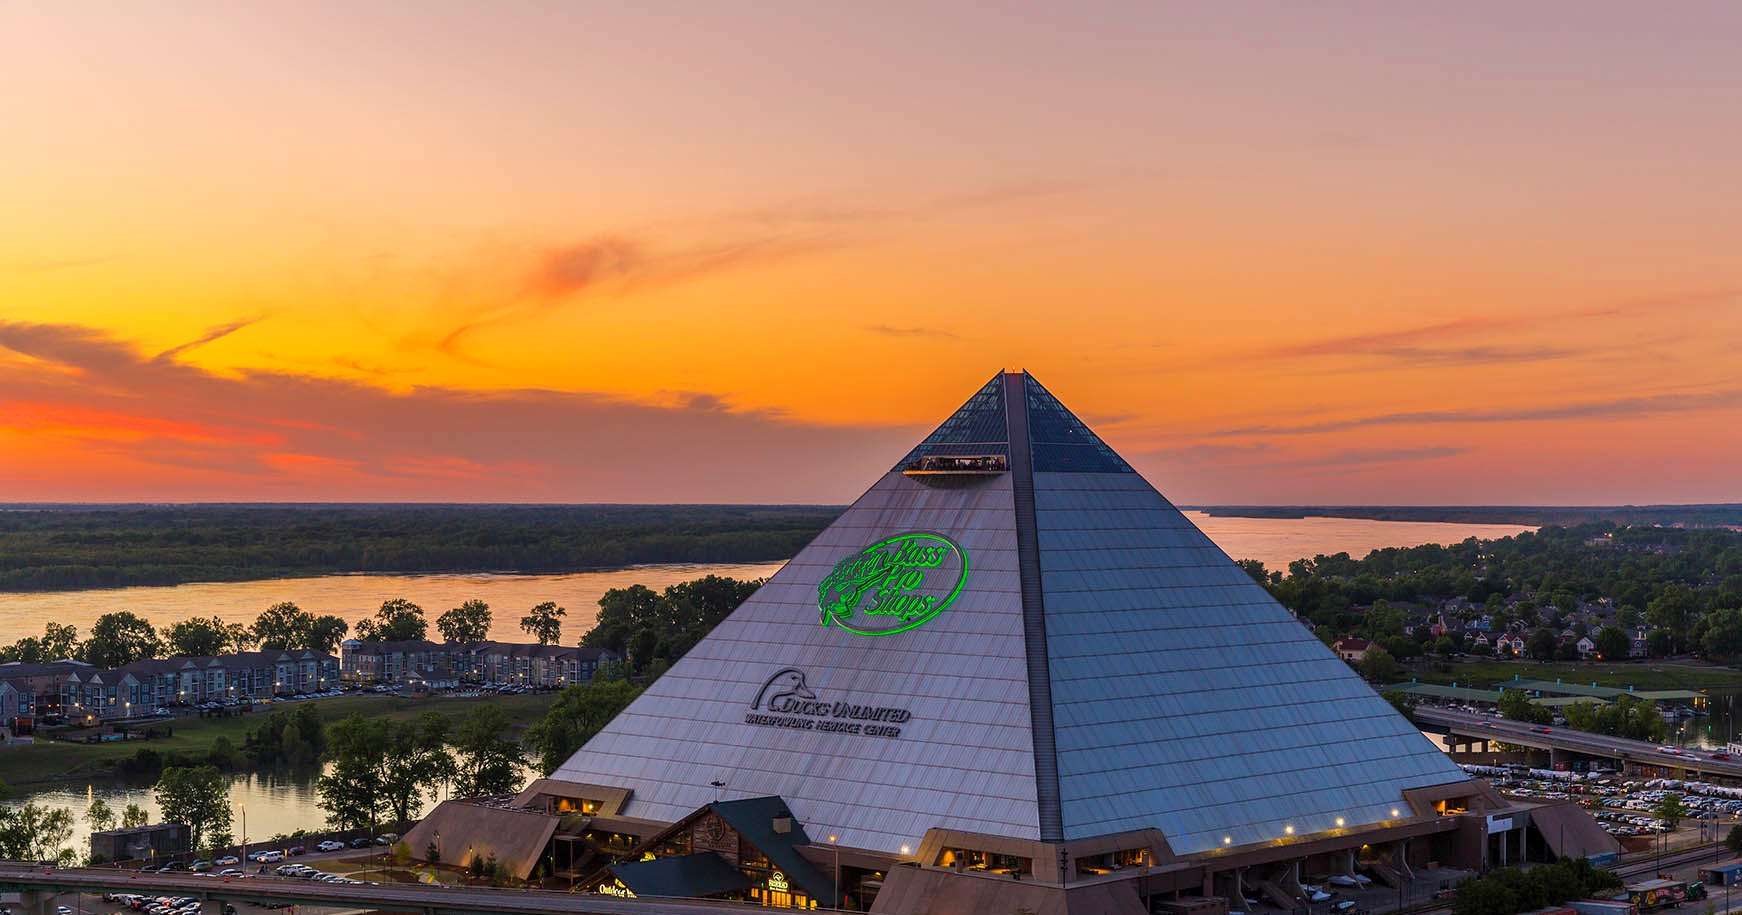 Inside a structure that was once the site of NCAA basketball tournaments and heavyweight championship boxing matches, Bass Pro Shops founder Johnny Morris and crew have created an absolute wonderland for outdoors enthusiasts.